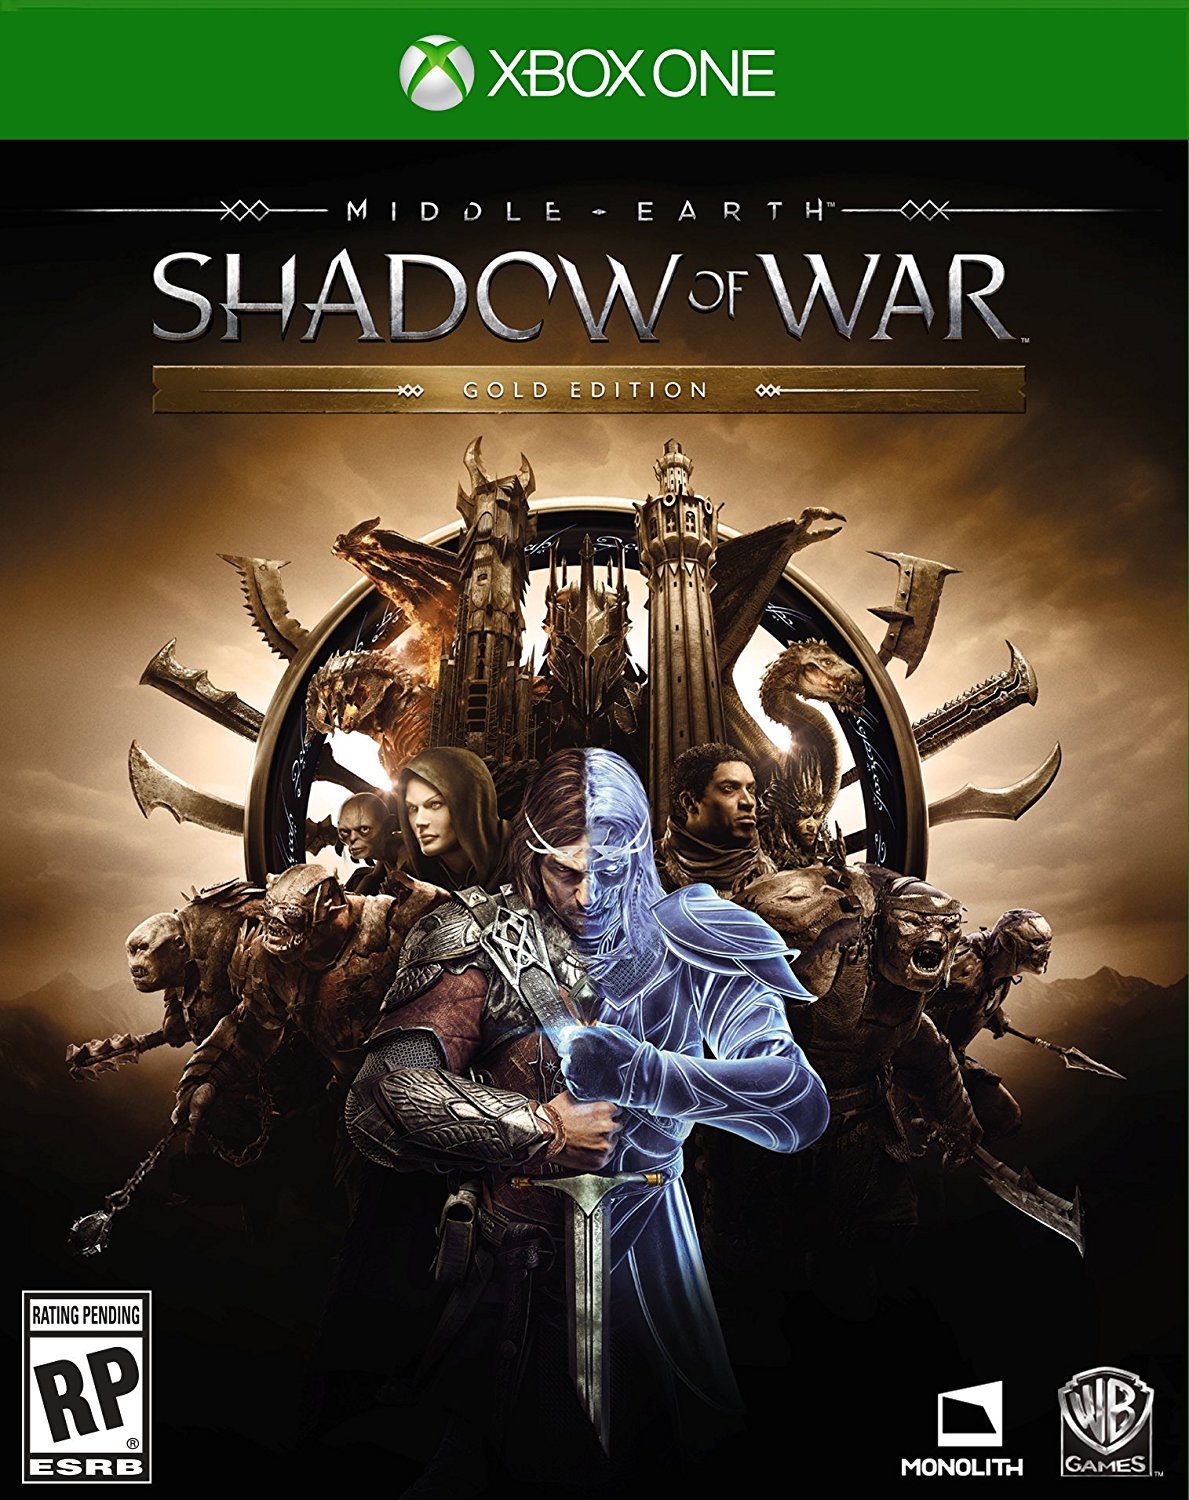 Middle-earth: Shadow of War (Средиземье: Тени Войны) – Gold Edition